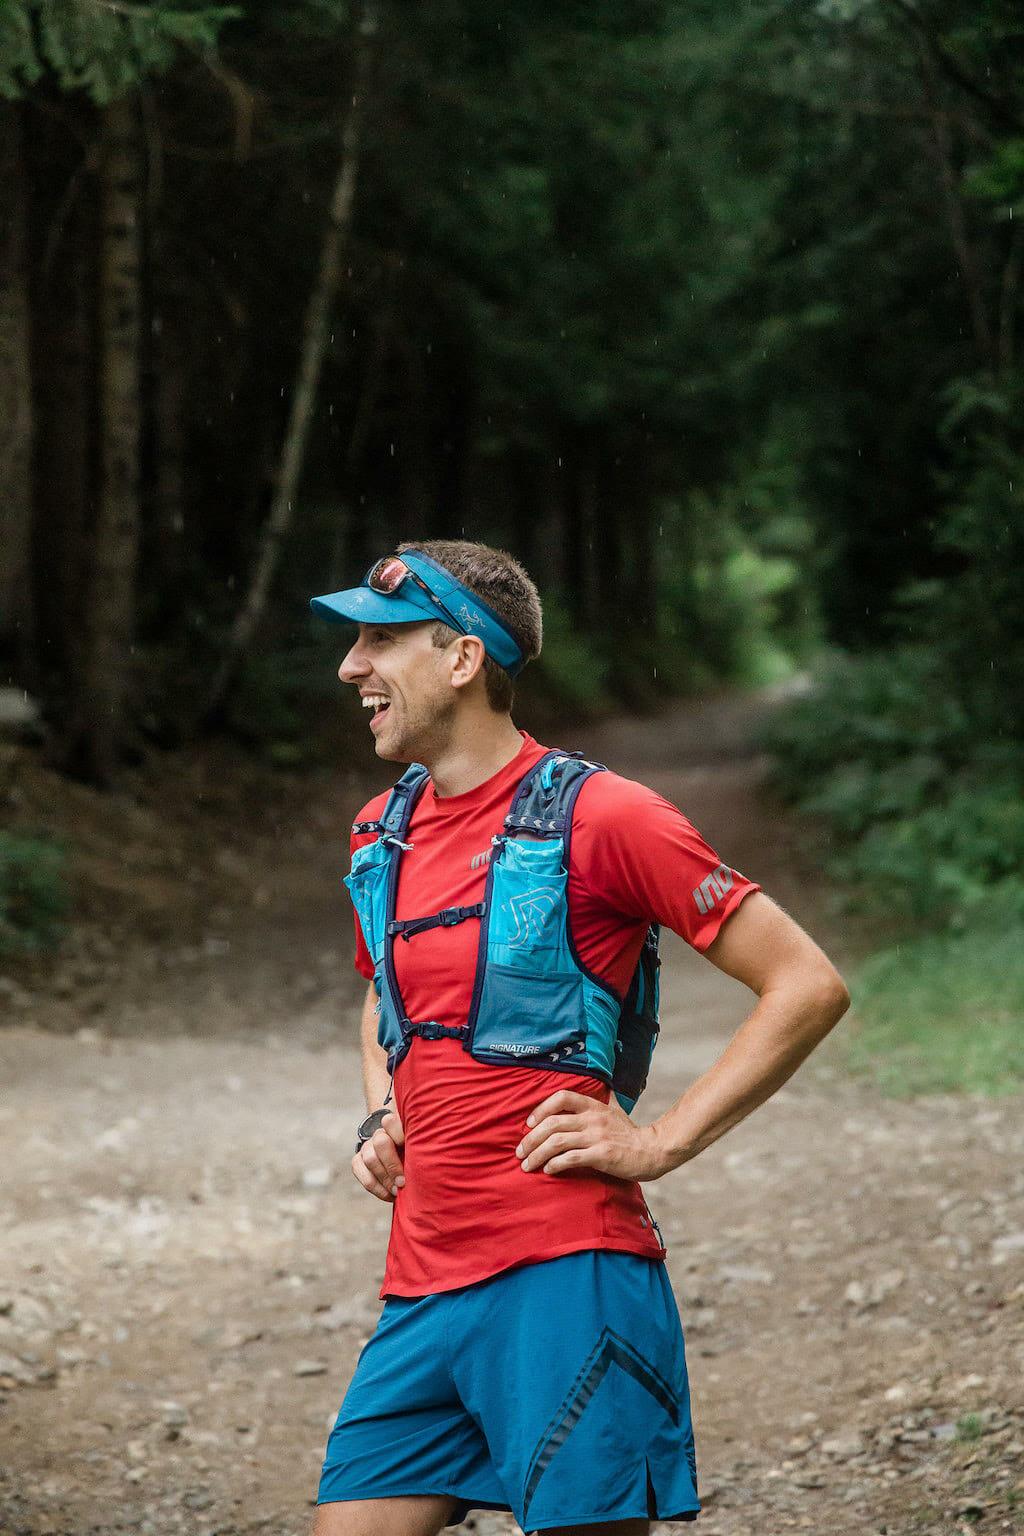 Laughing Sam Hill with red shirt and blue viser, shorts and trail run vest